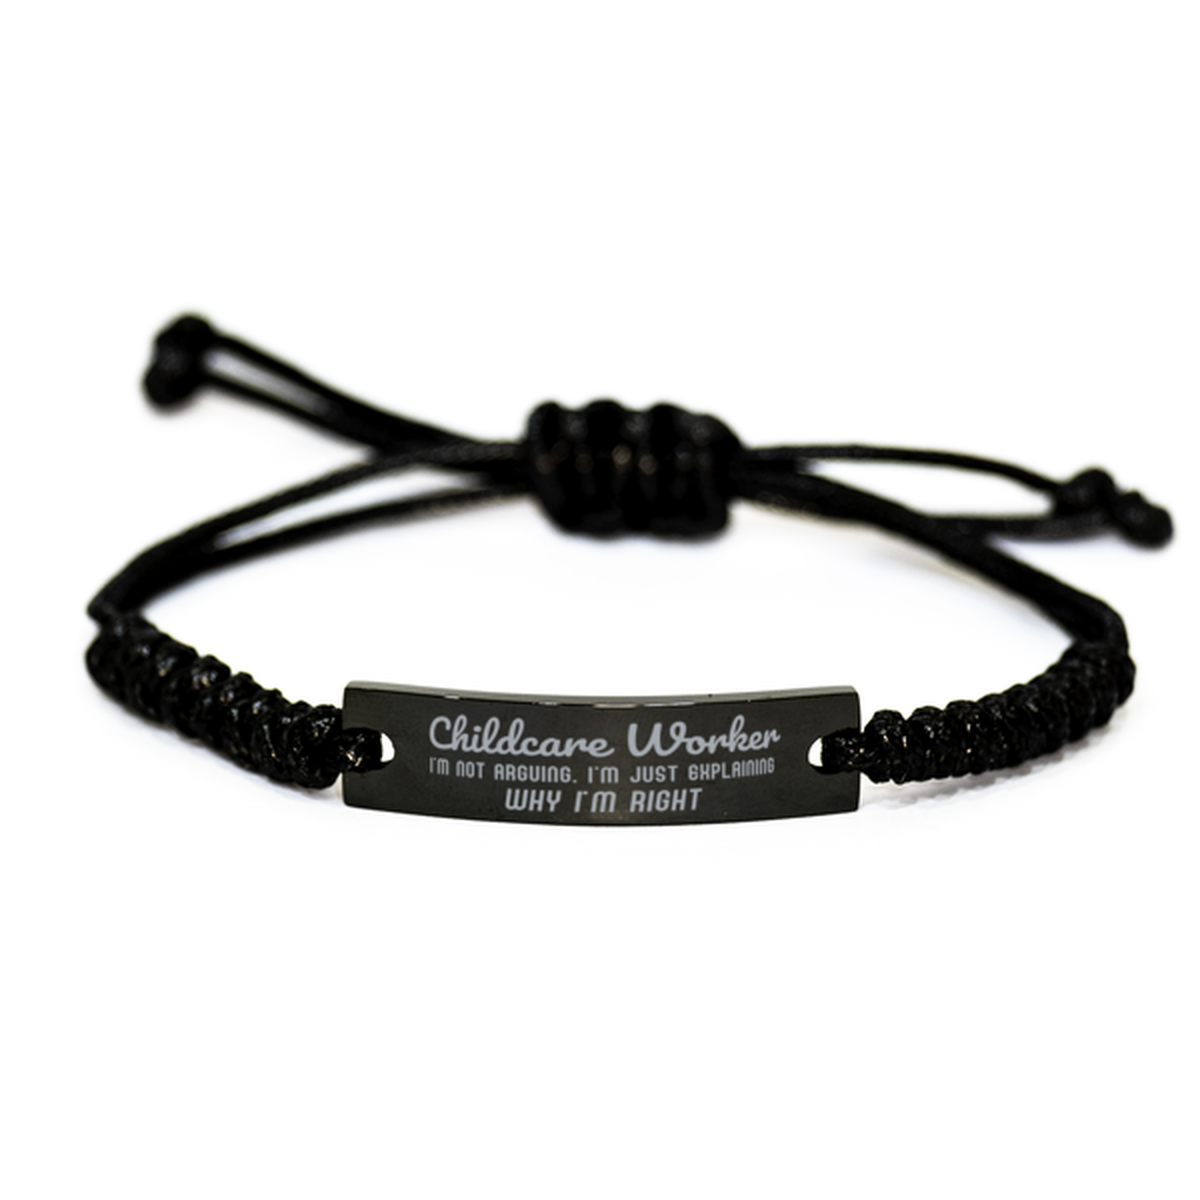 Childcare Worker I'm not Arguing. I'm Just Explaining Why I'm RIGHT Black Rope Bracelet, Funny Saying Quote Childcare Worker Gifts For Childcare Worker Graduation Birthday Christmas Gifts for Men Women Coworker